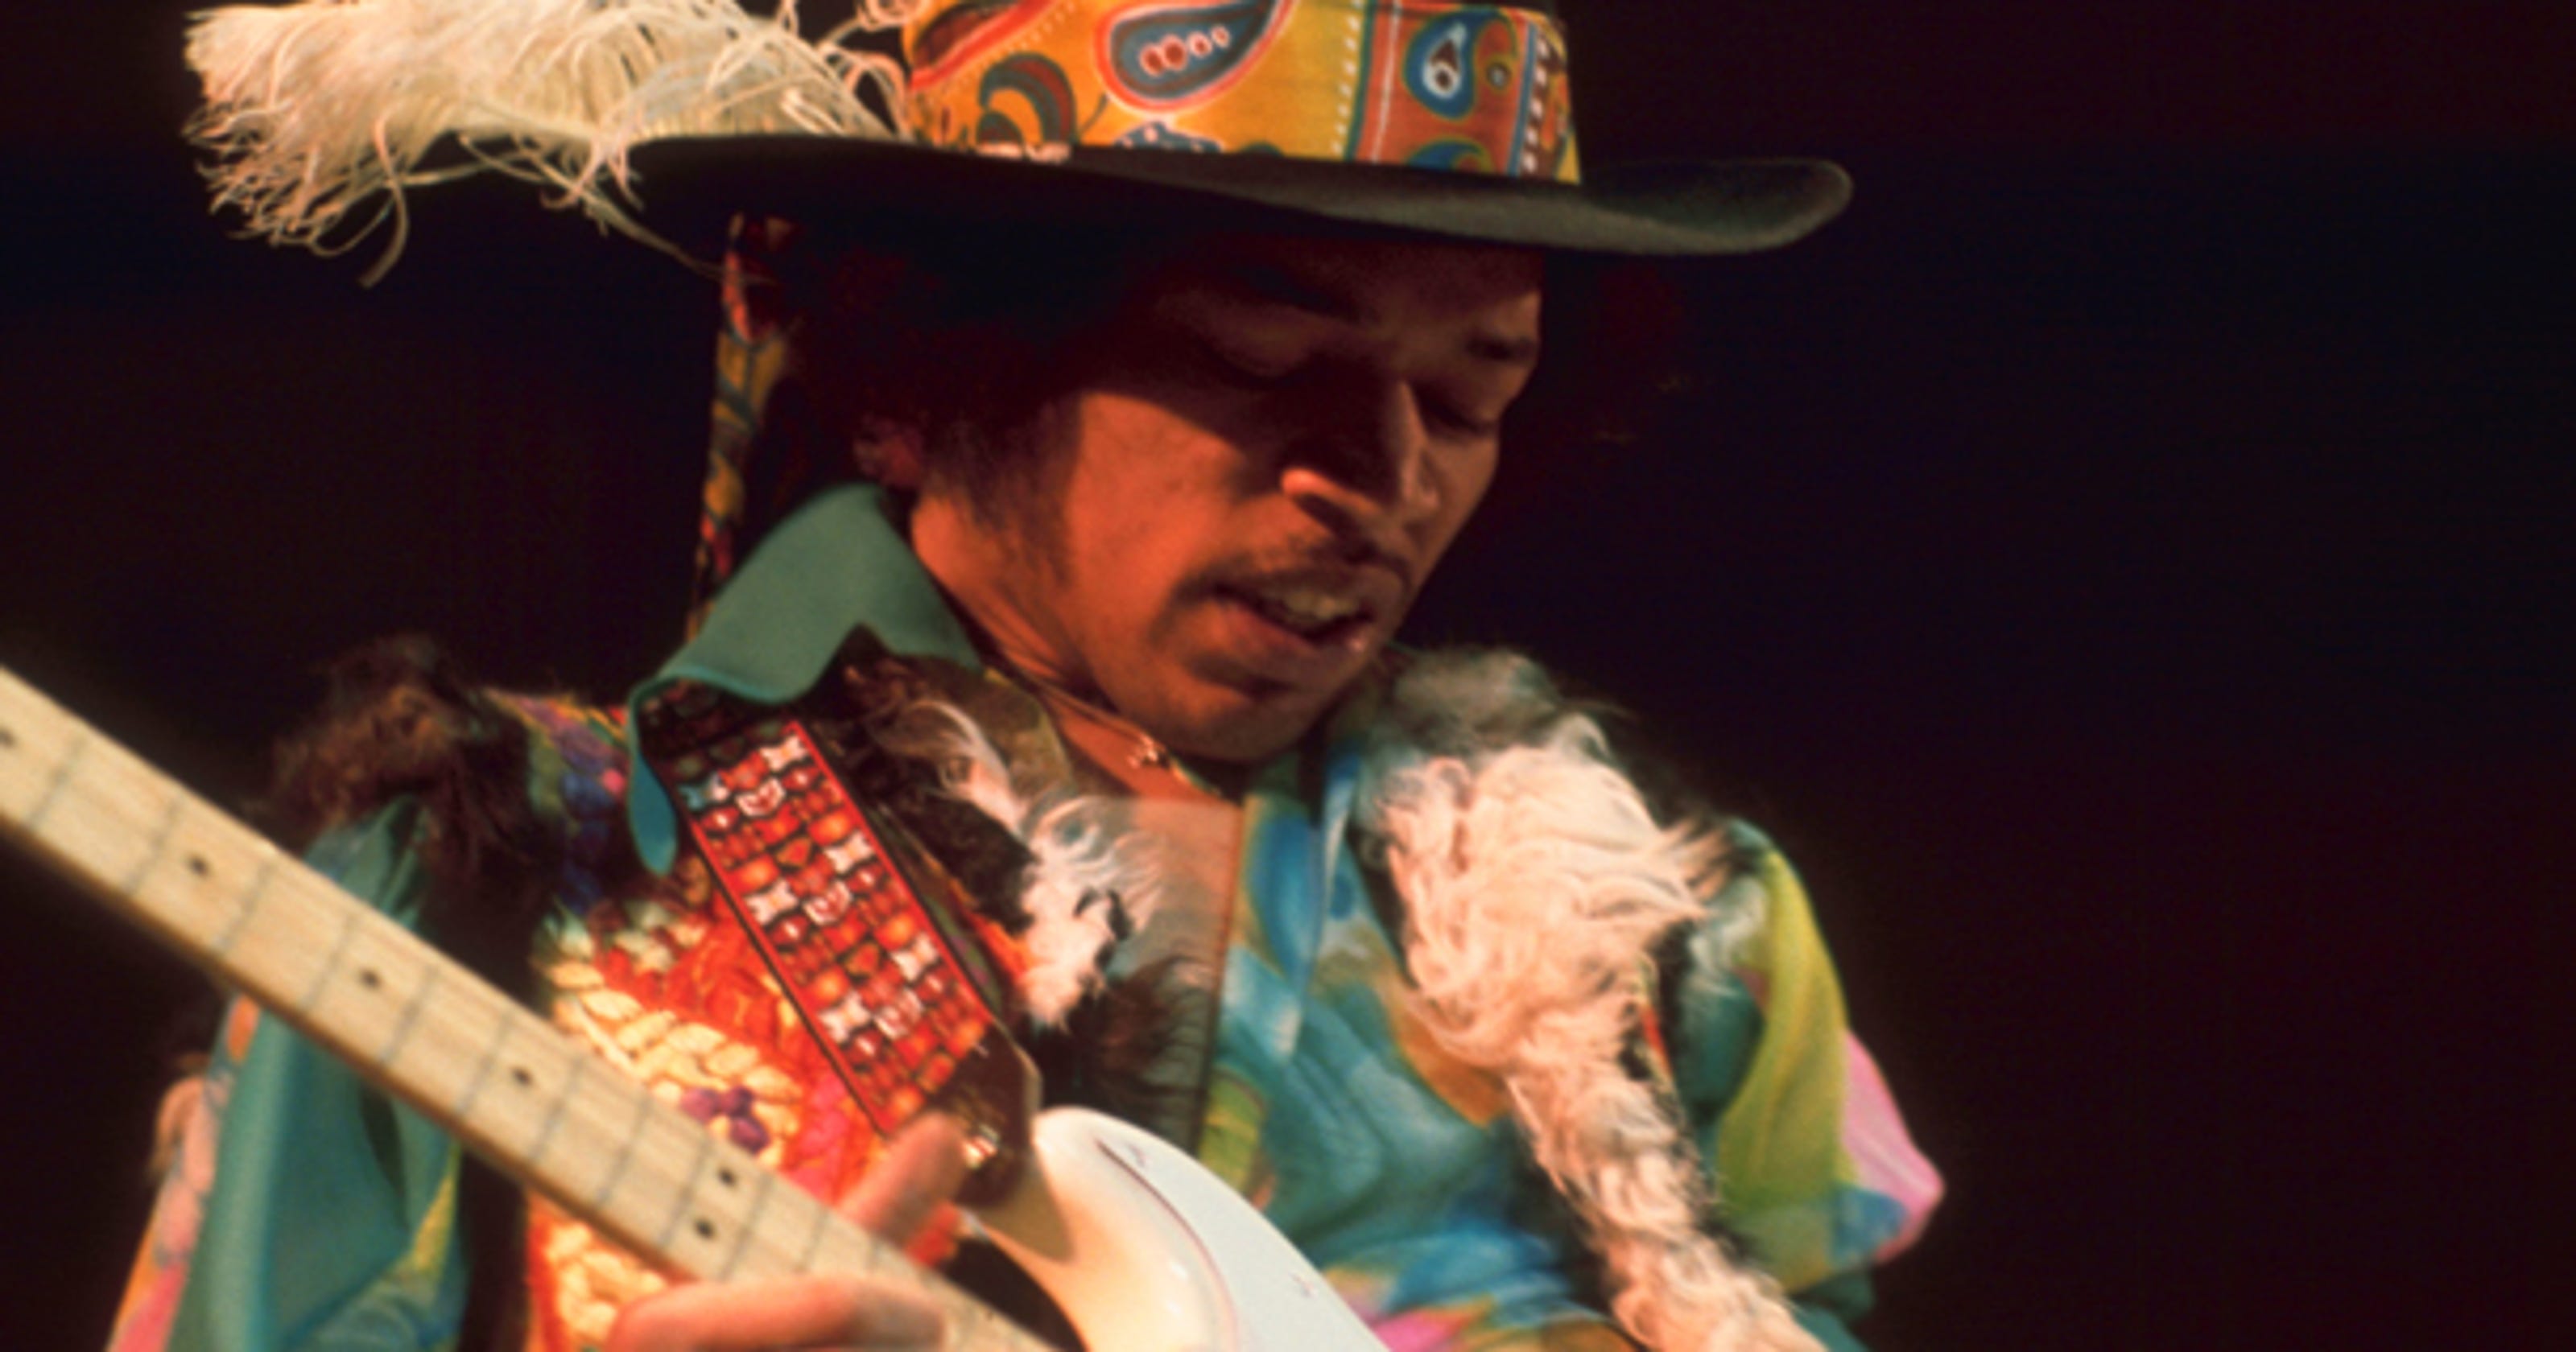 Exclusive Watch The Trailer For Pbs Jimi Hendrix Doc 